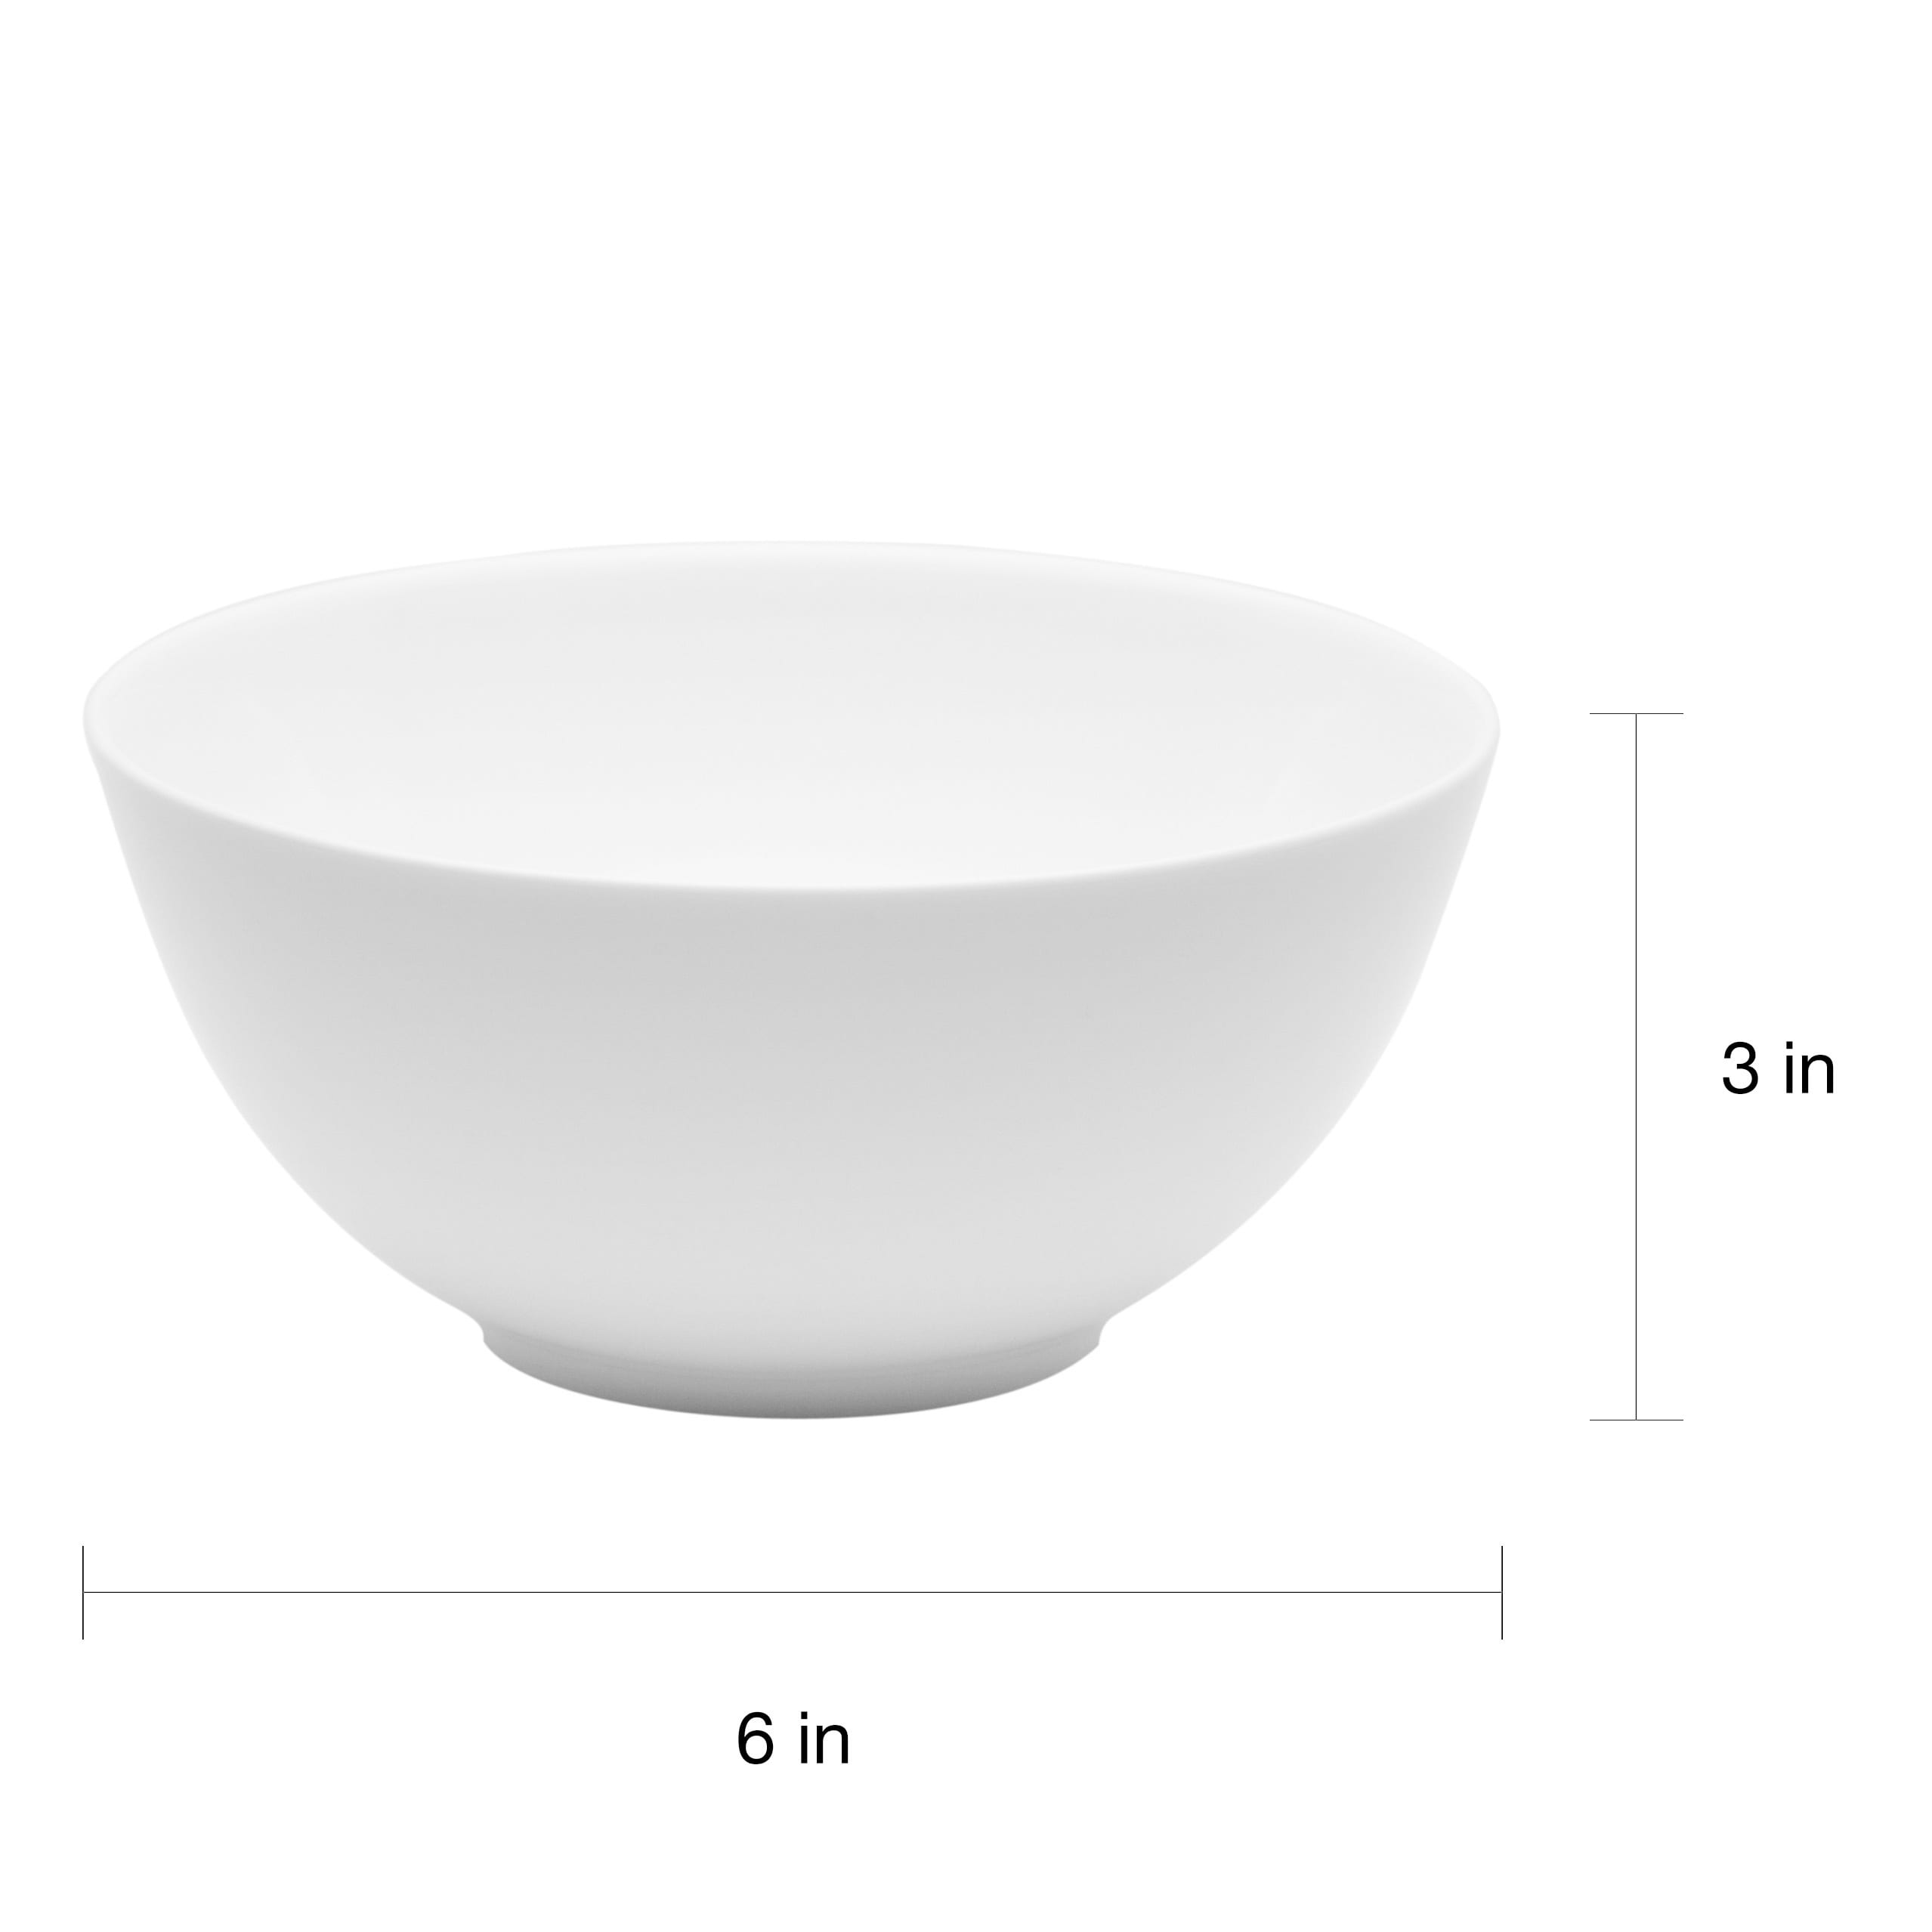 https://ak1.ostkcdn.com/images/products/10296783/Every-Time-White-Tall-Cereal-Bowl-Set-of-6-fd582979-9075-47aa-8a90-781d44a879b6.jpg